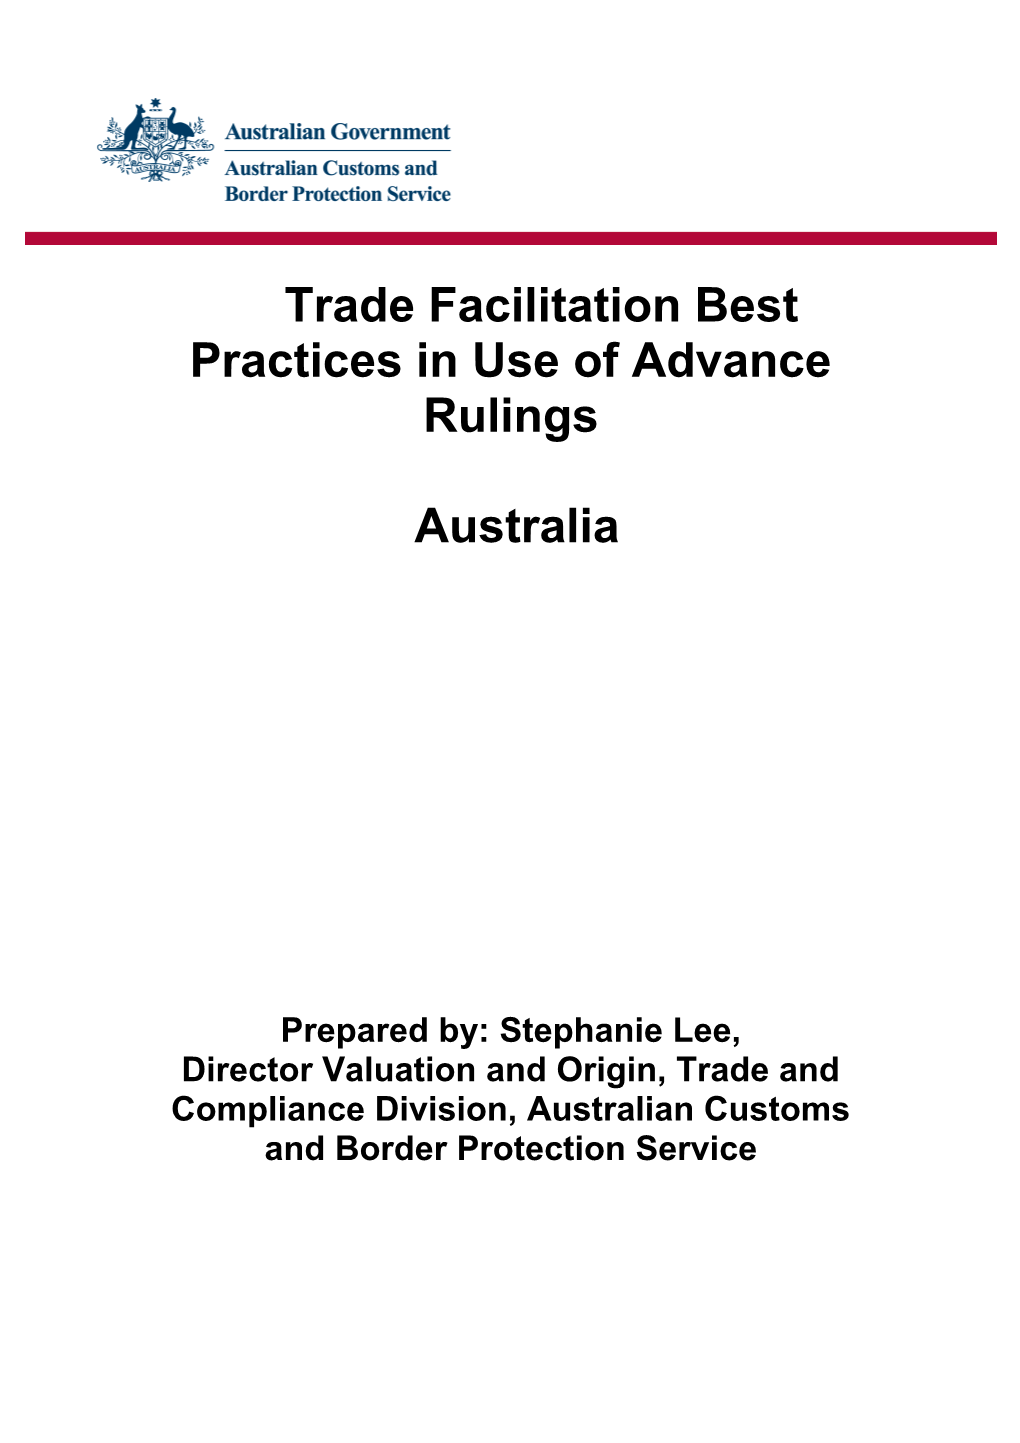 Trade Facilitation Best Practices in Use of Advance Rulings